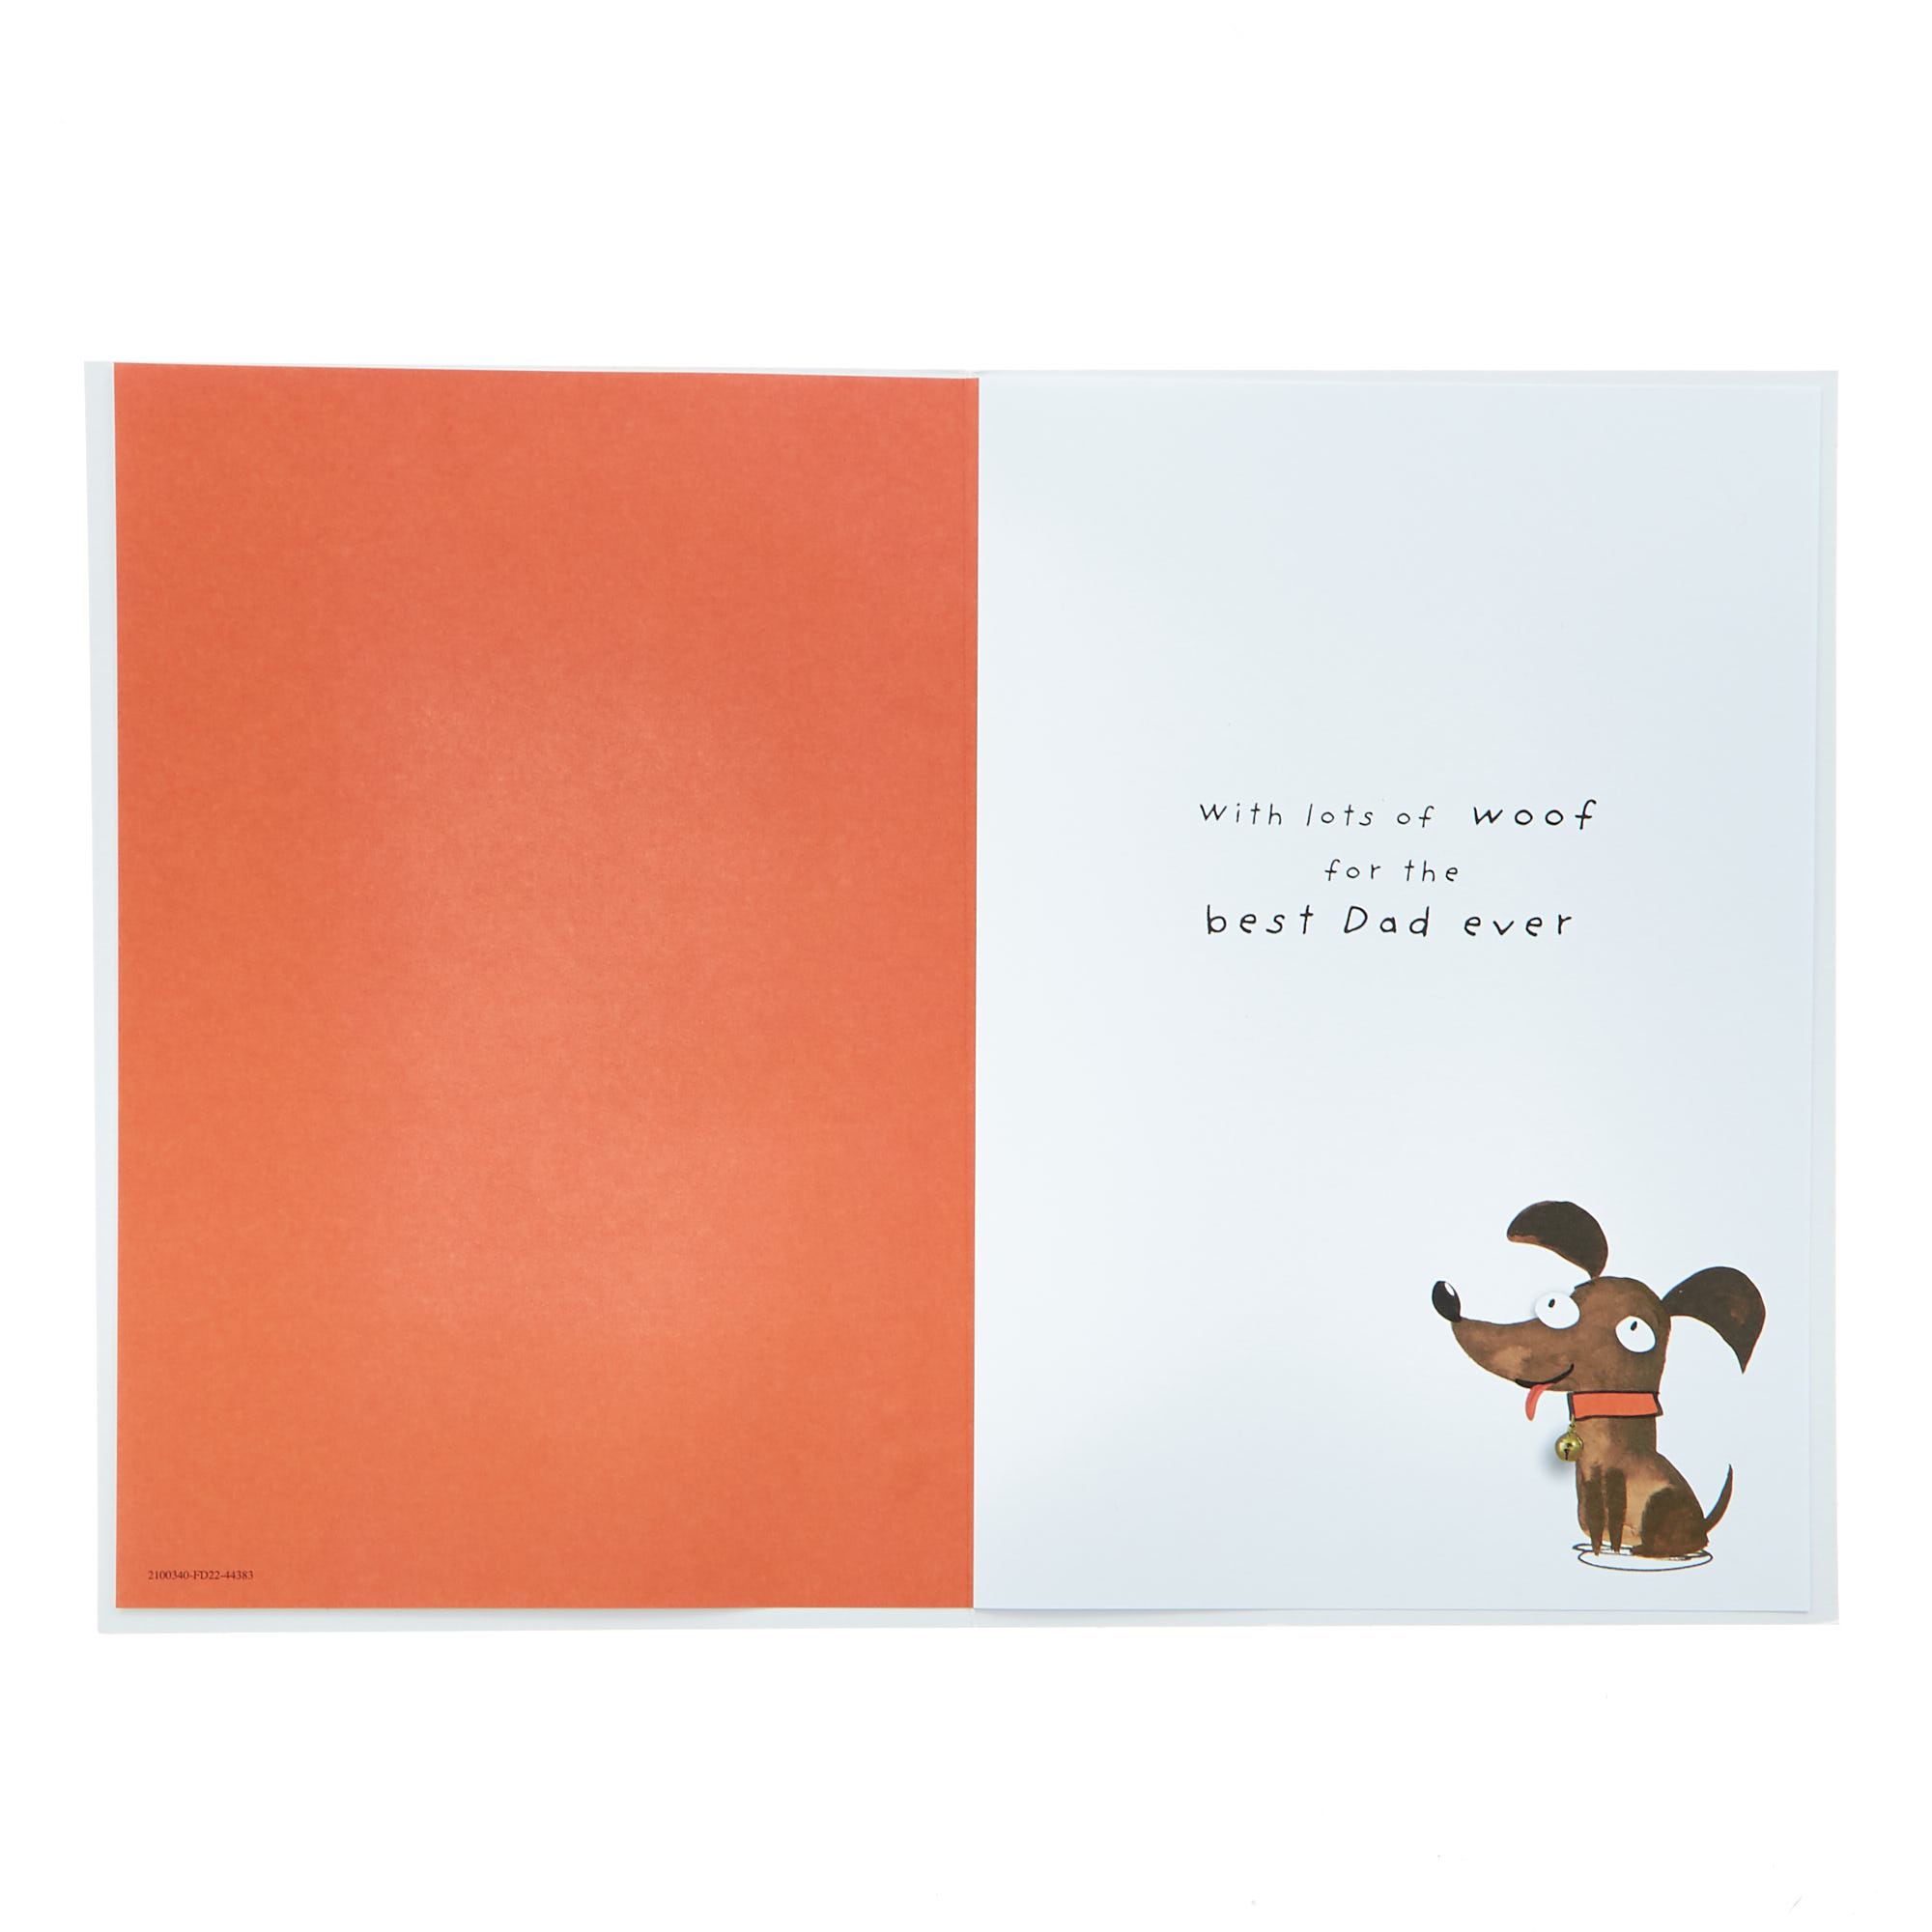 buy-father-s-day-card-from-the-dog-no-1-dad-for-gbp-0-99-card